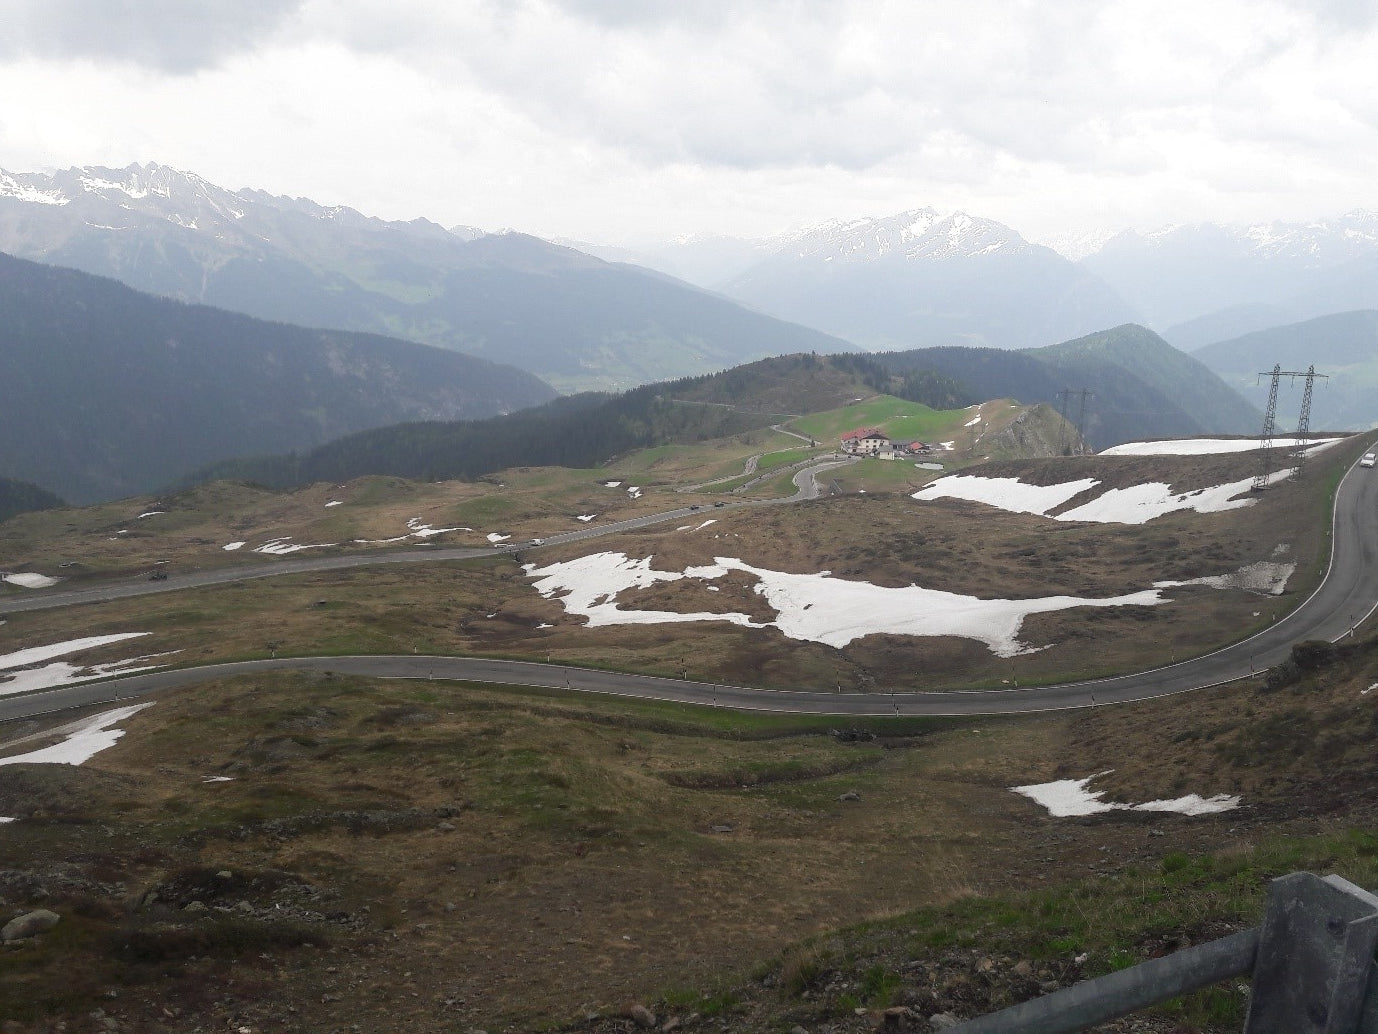 The view from atop the Jaufenpass. An enjoyable HC climb.